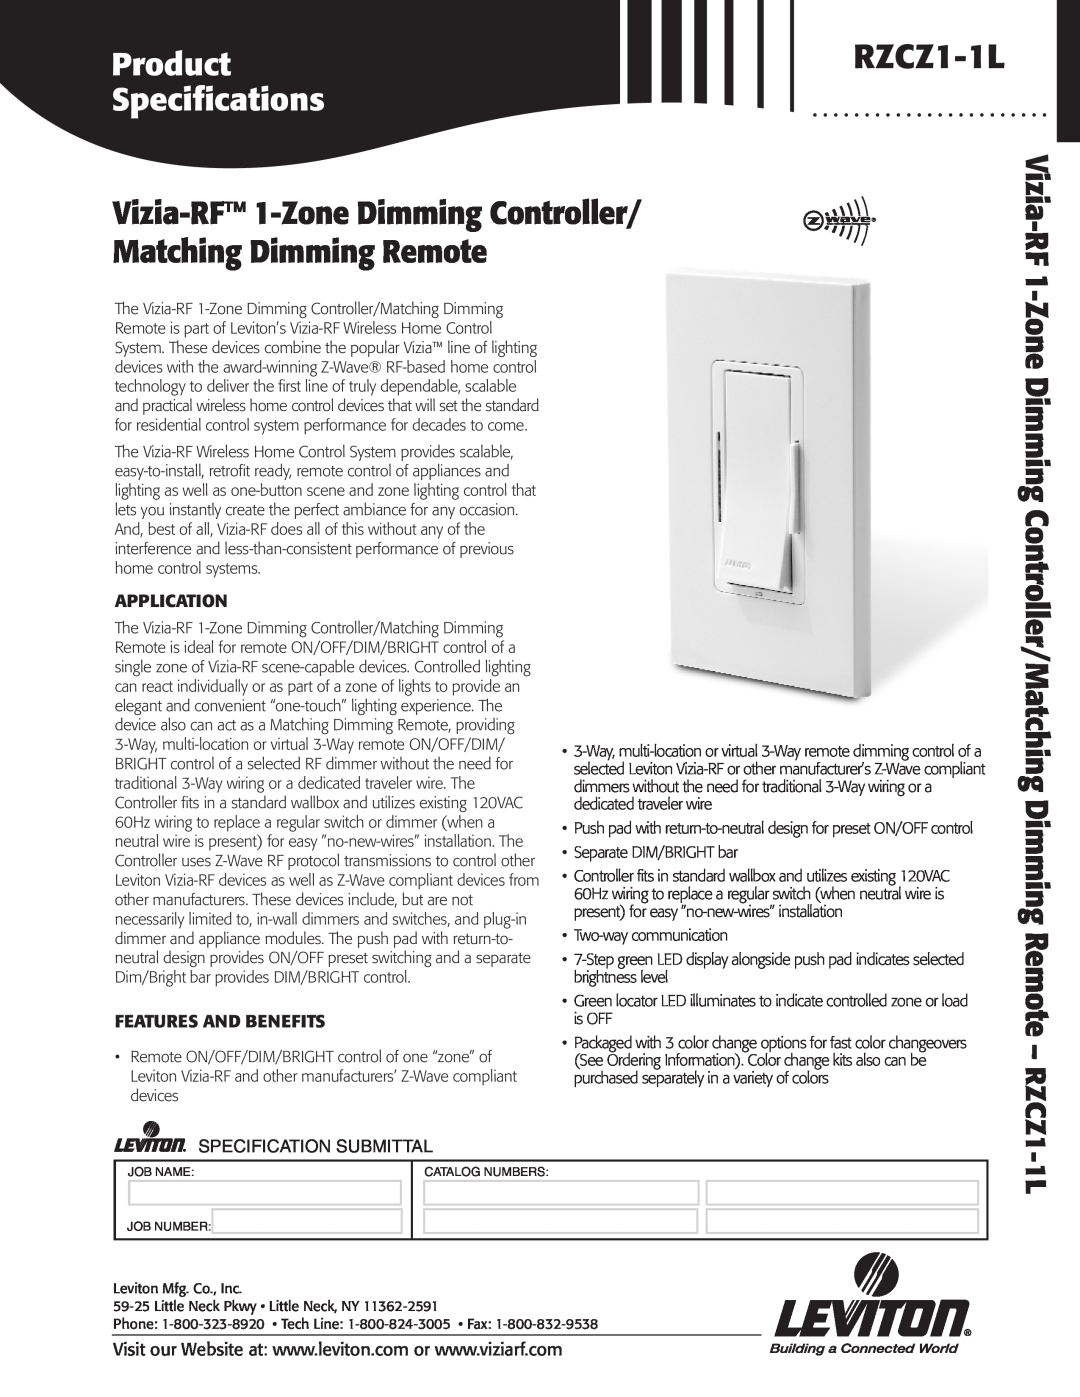 Leviton LE-RZCZ specifications Vizia-RF 1-Zone Dimming Controller, Matching Dimming Remote, Application, Product, RZCZ1-1L 